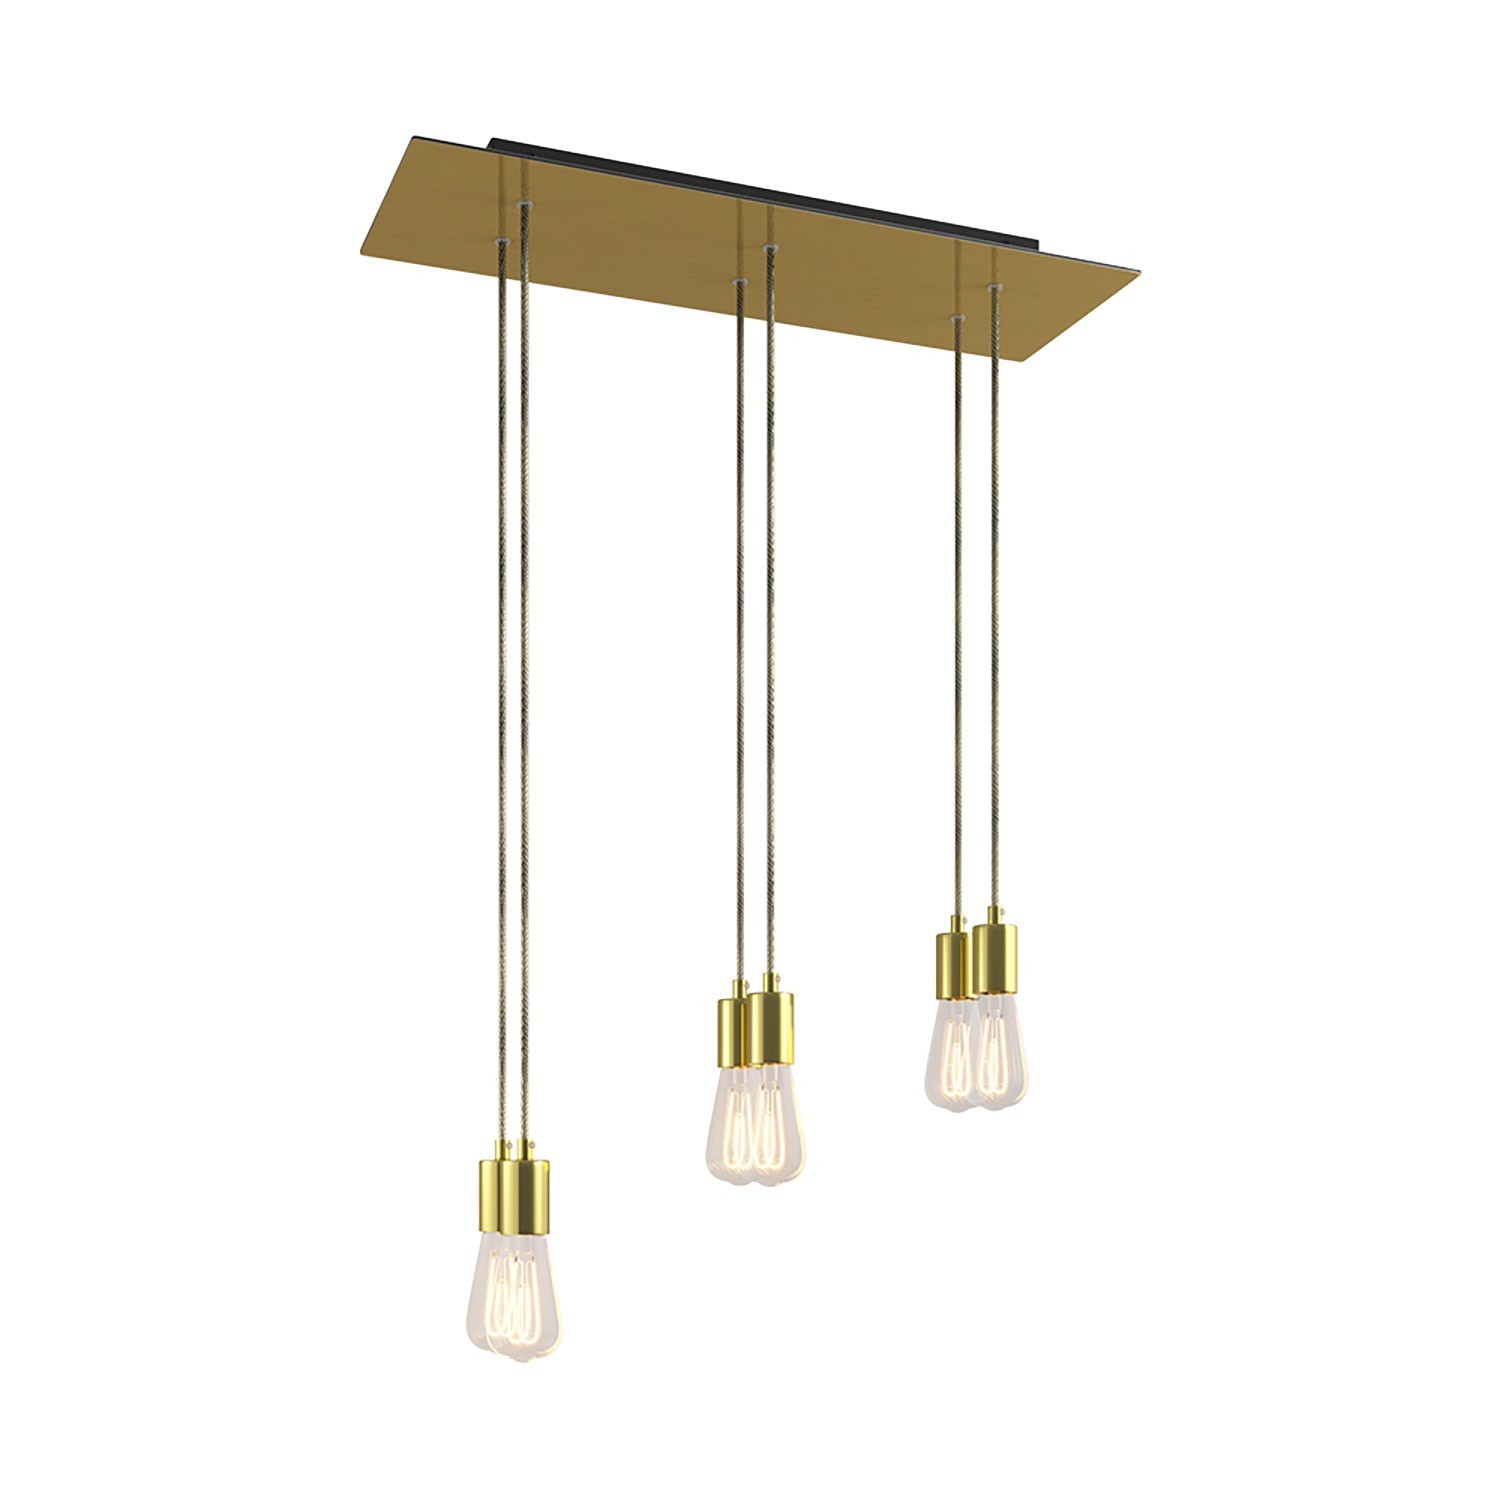 6-light pendant lamp with 675 mm  rectangular XXL Rose-One, featuring fabric cable and metal finishes